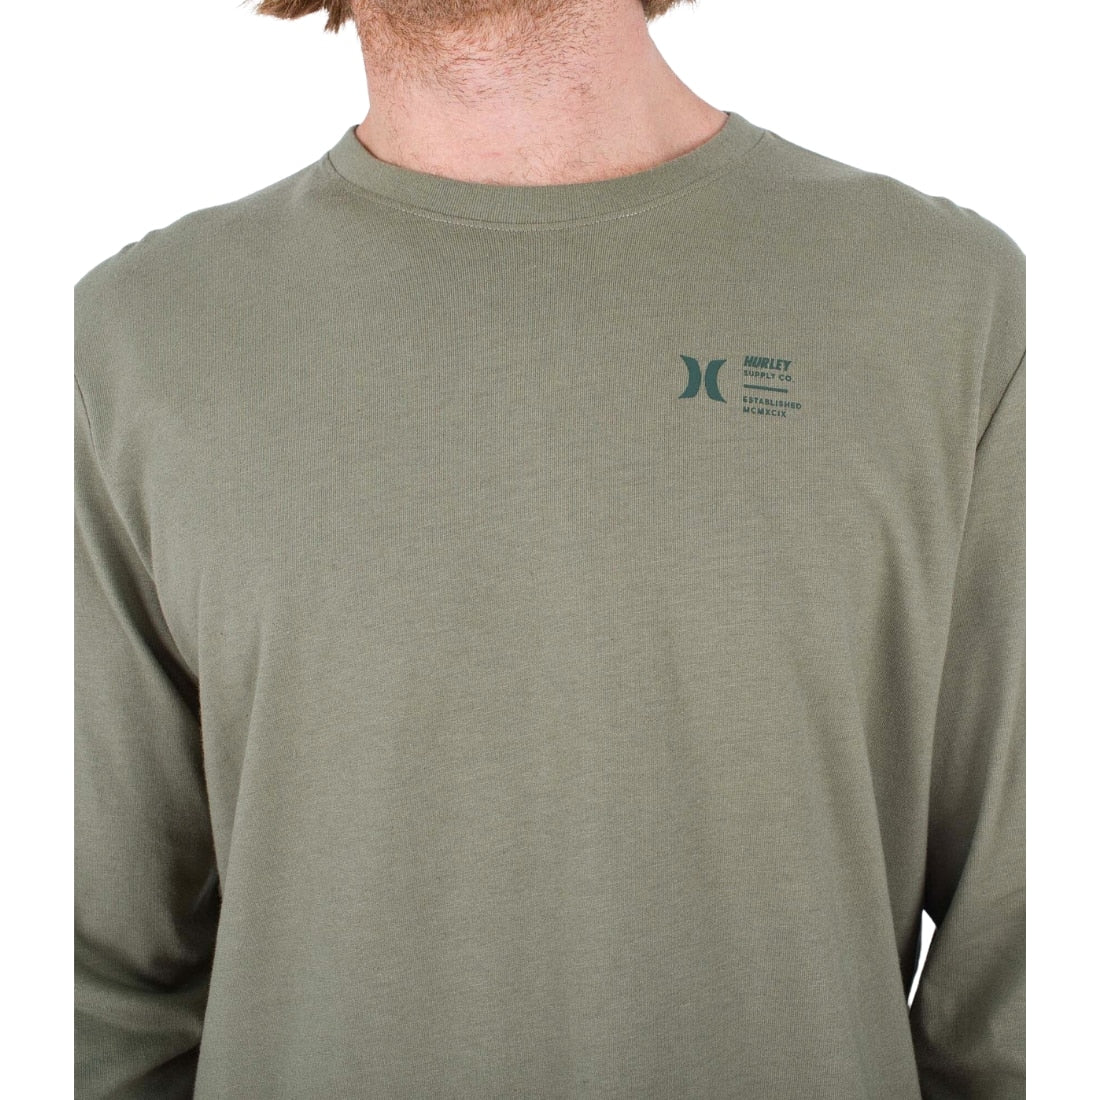 Hurley Everyday Explorer Supply Longsleeve T-Shirt - Army - Mens Surf Brand T-Shirt by Hurley